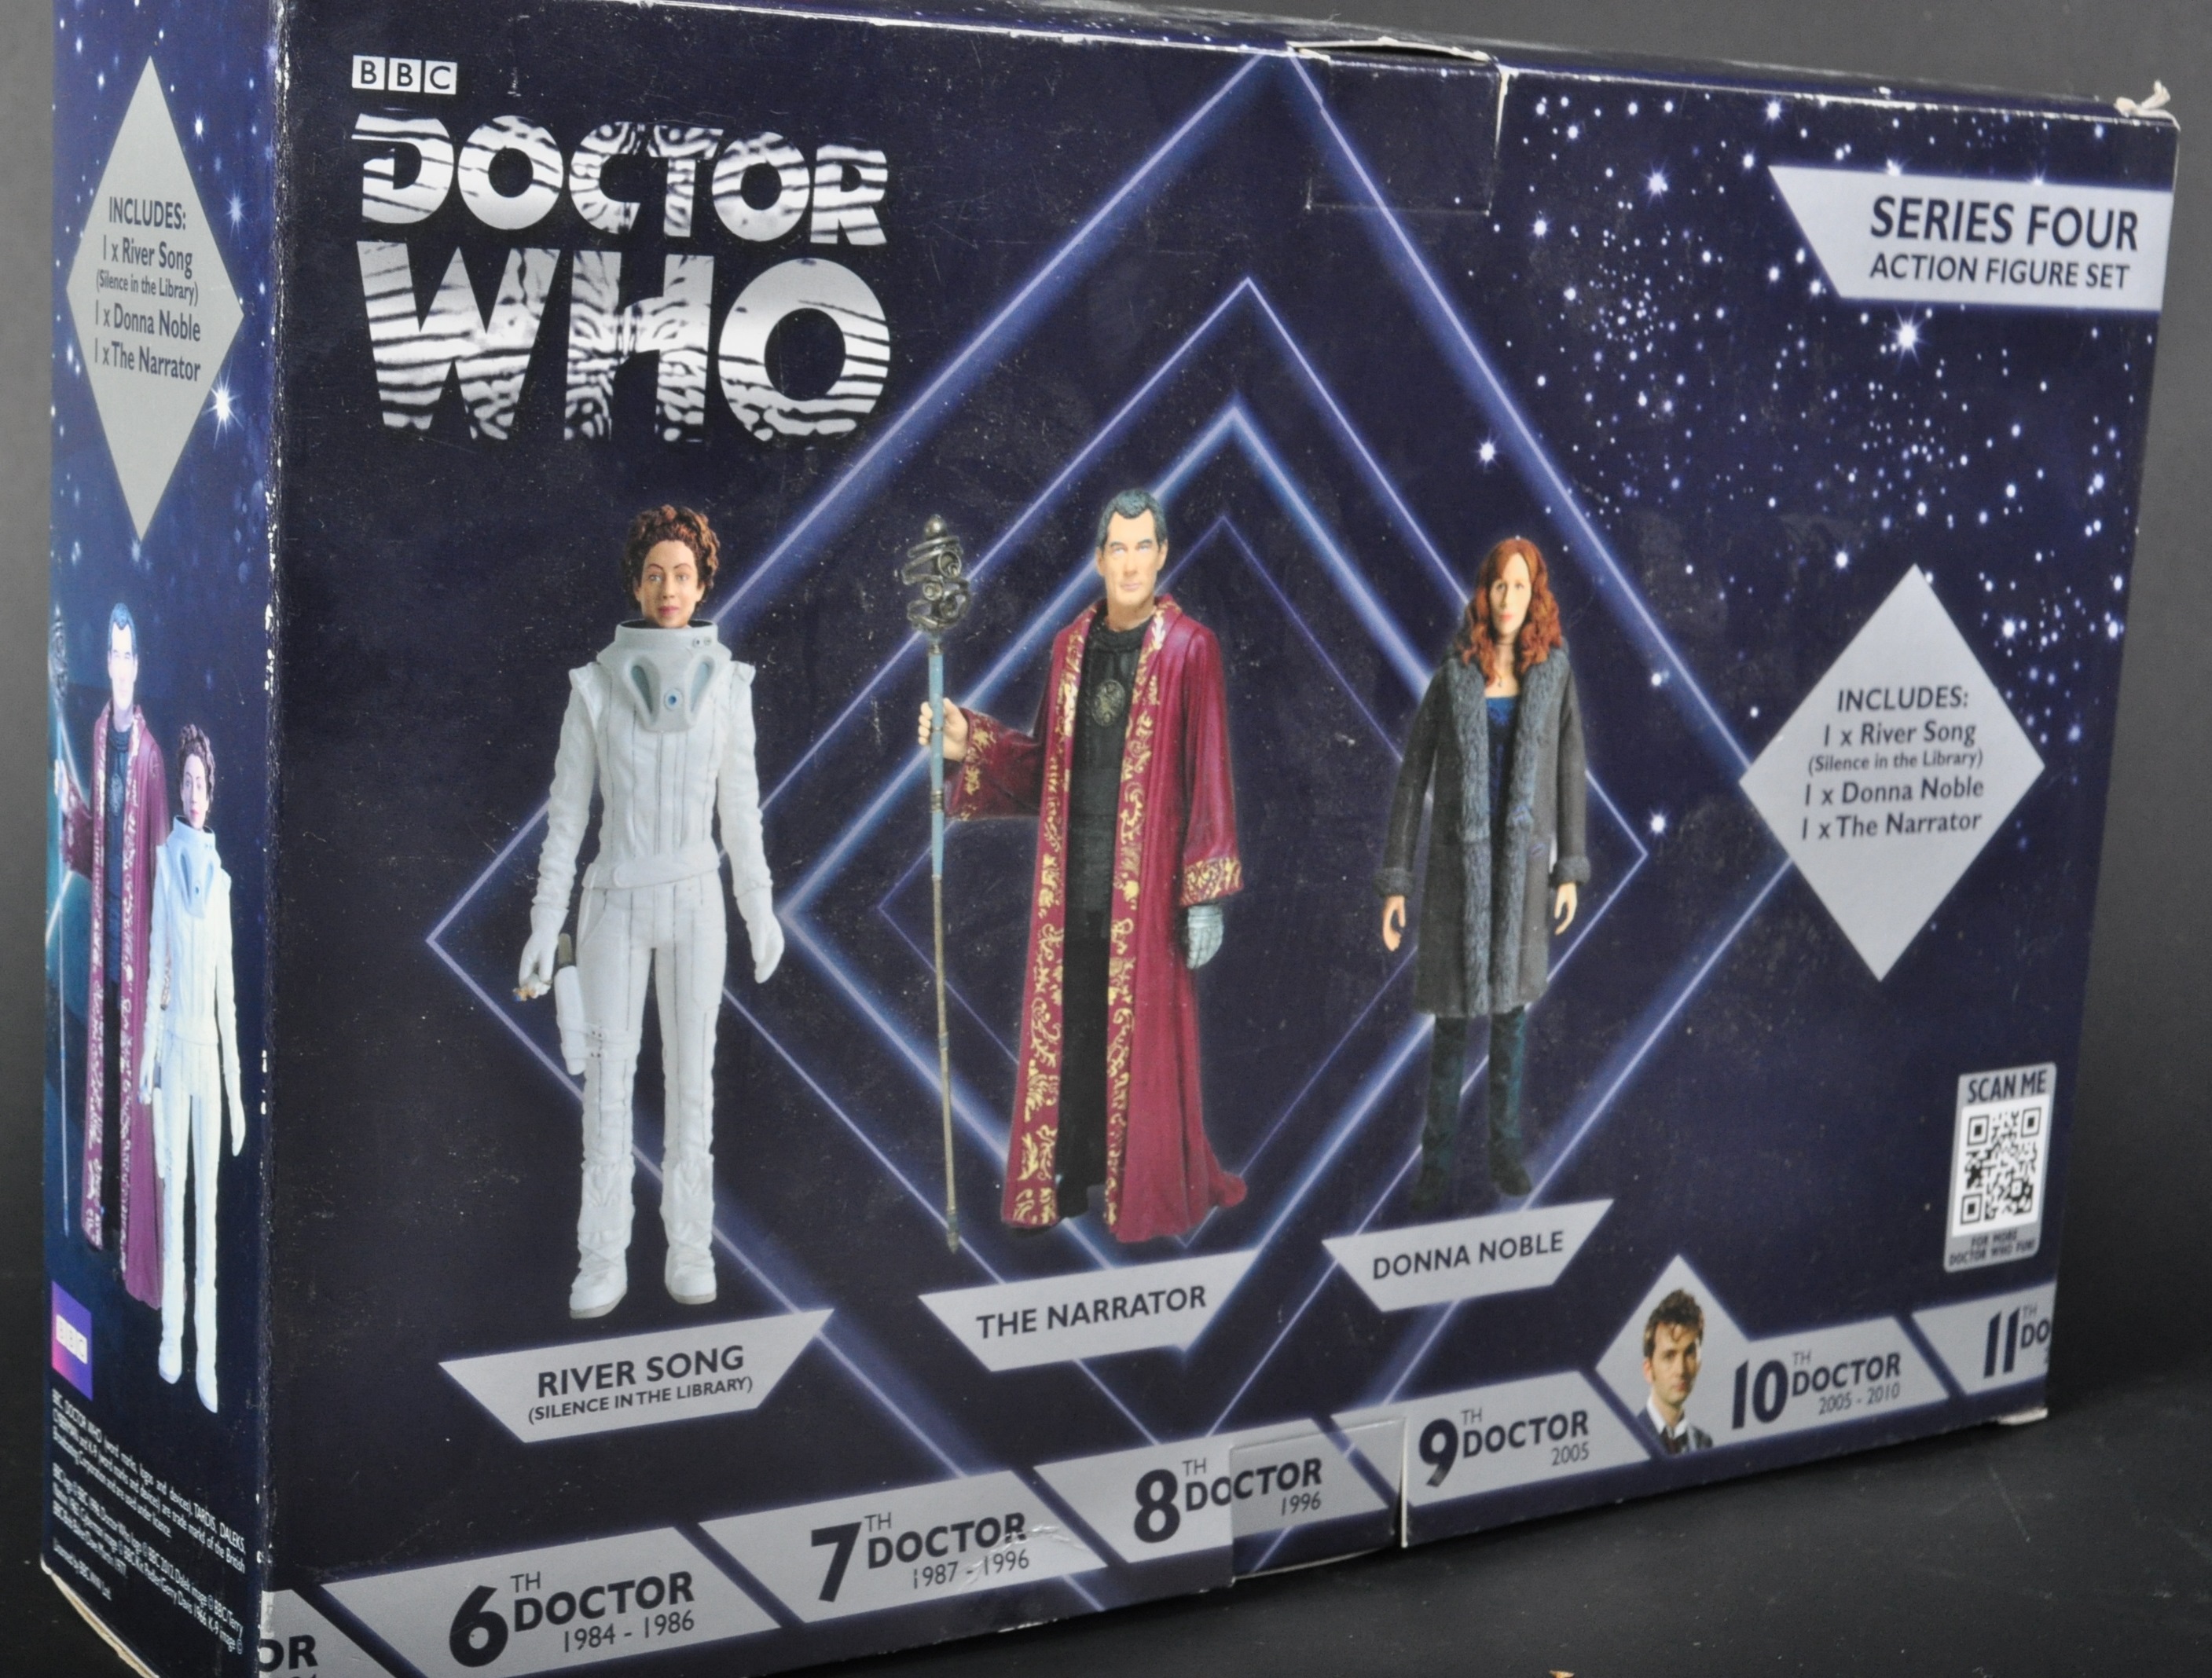 DOCTOR WHO - CHARACTER OPTIONS - SERIES FOUR ACTION FIGURE SET - Image 4 of 4